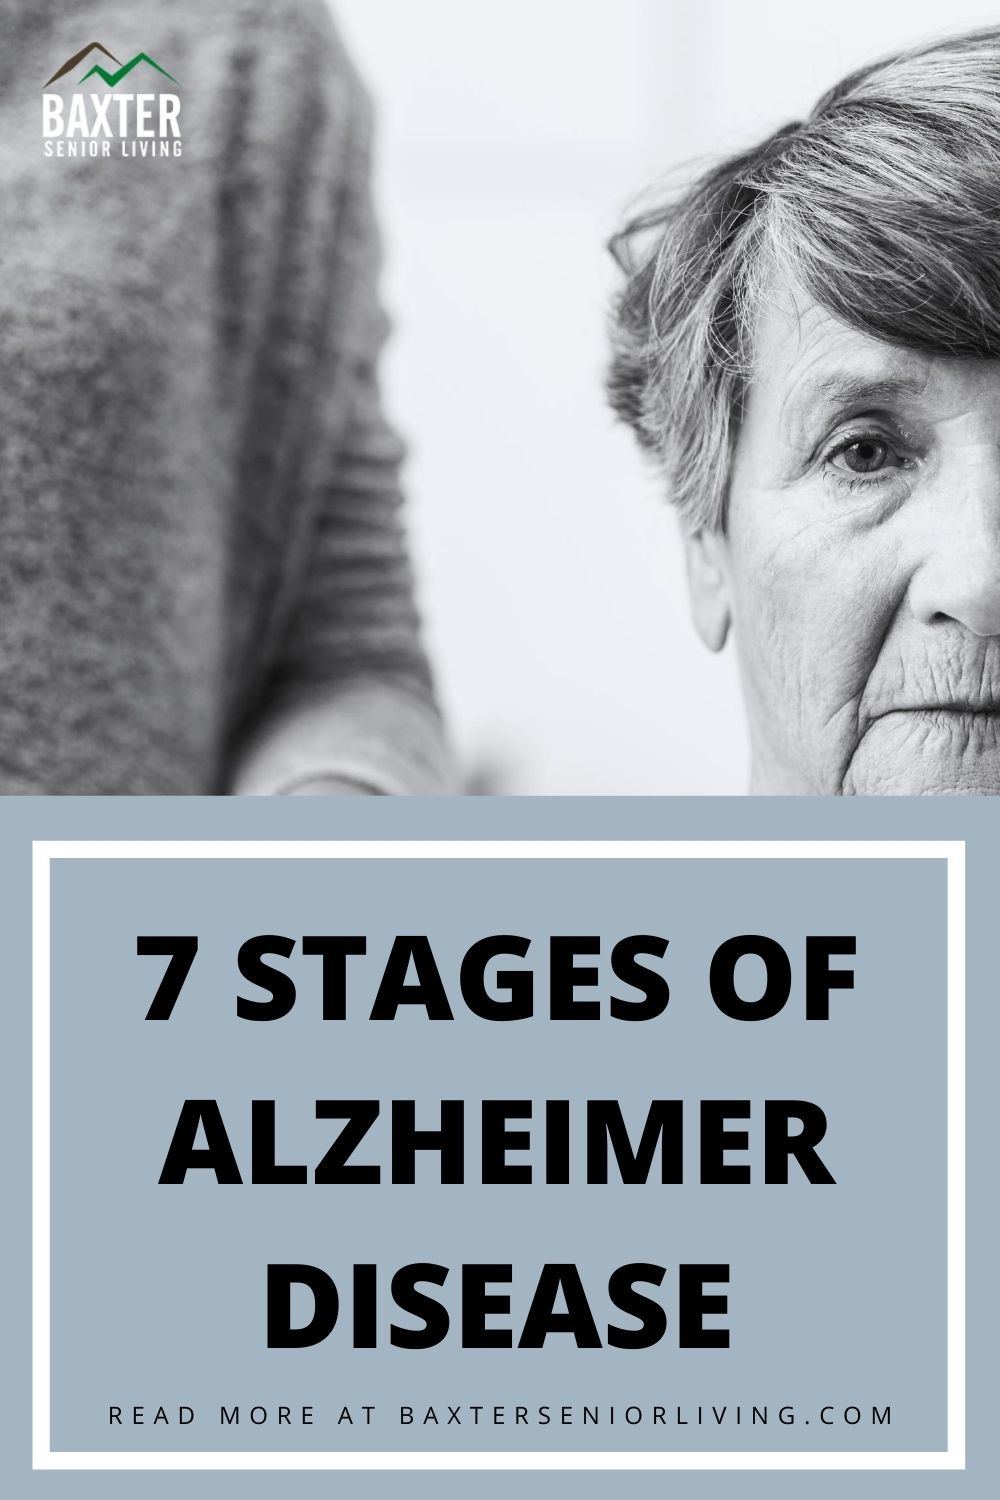 7 Stages of Alzheimer Disease